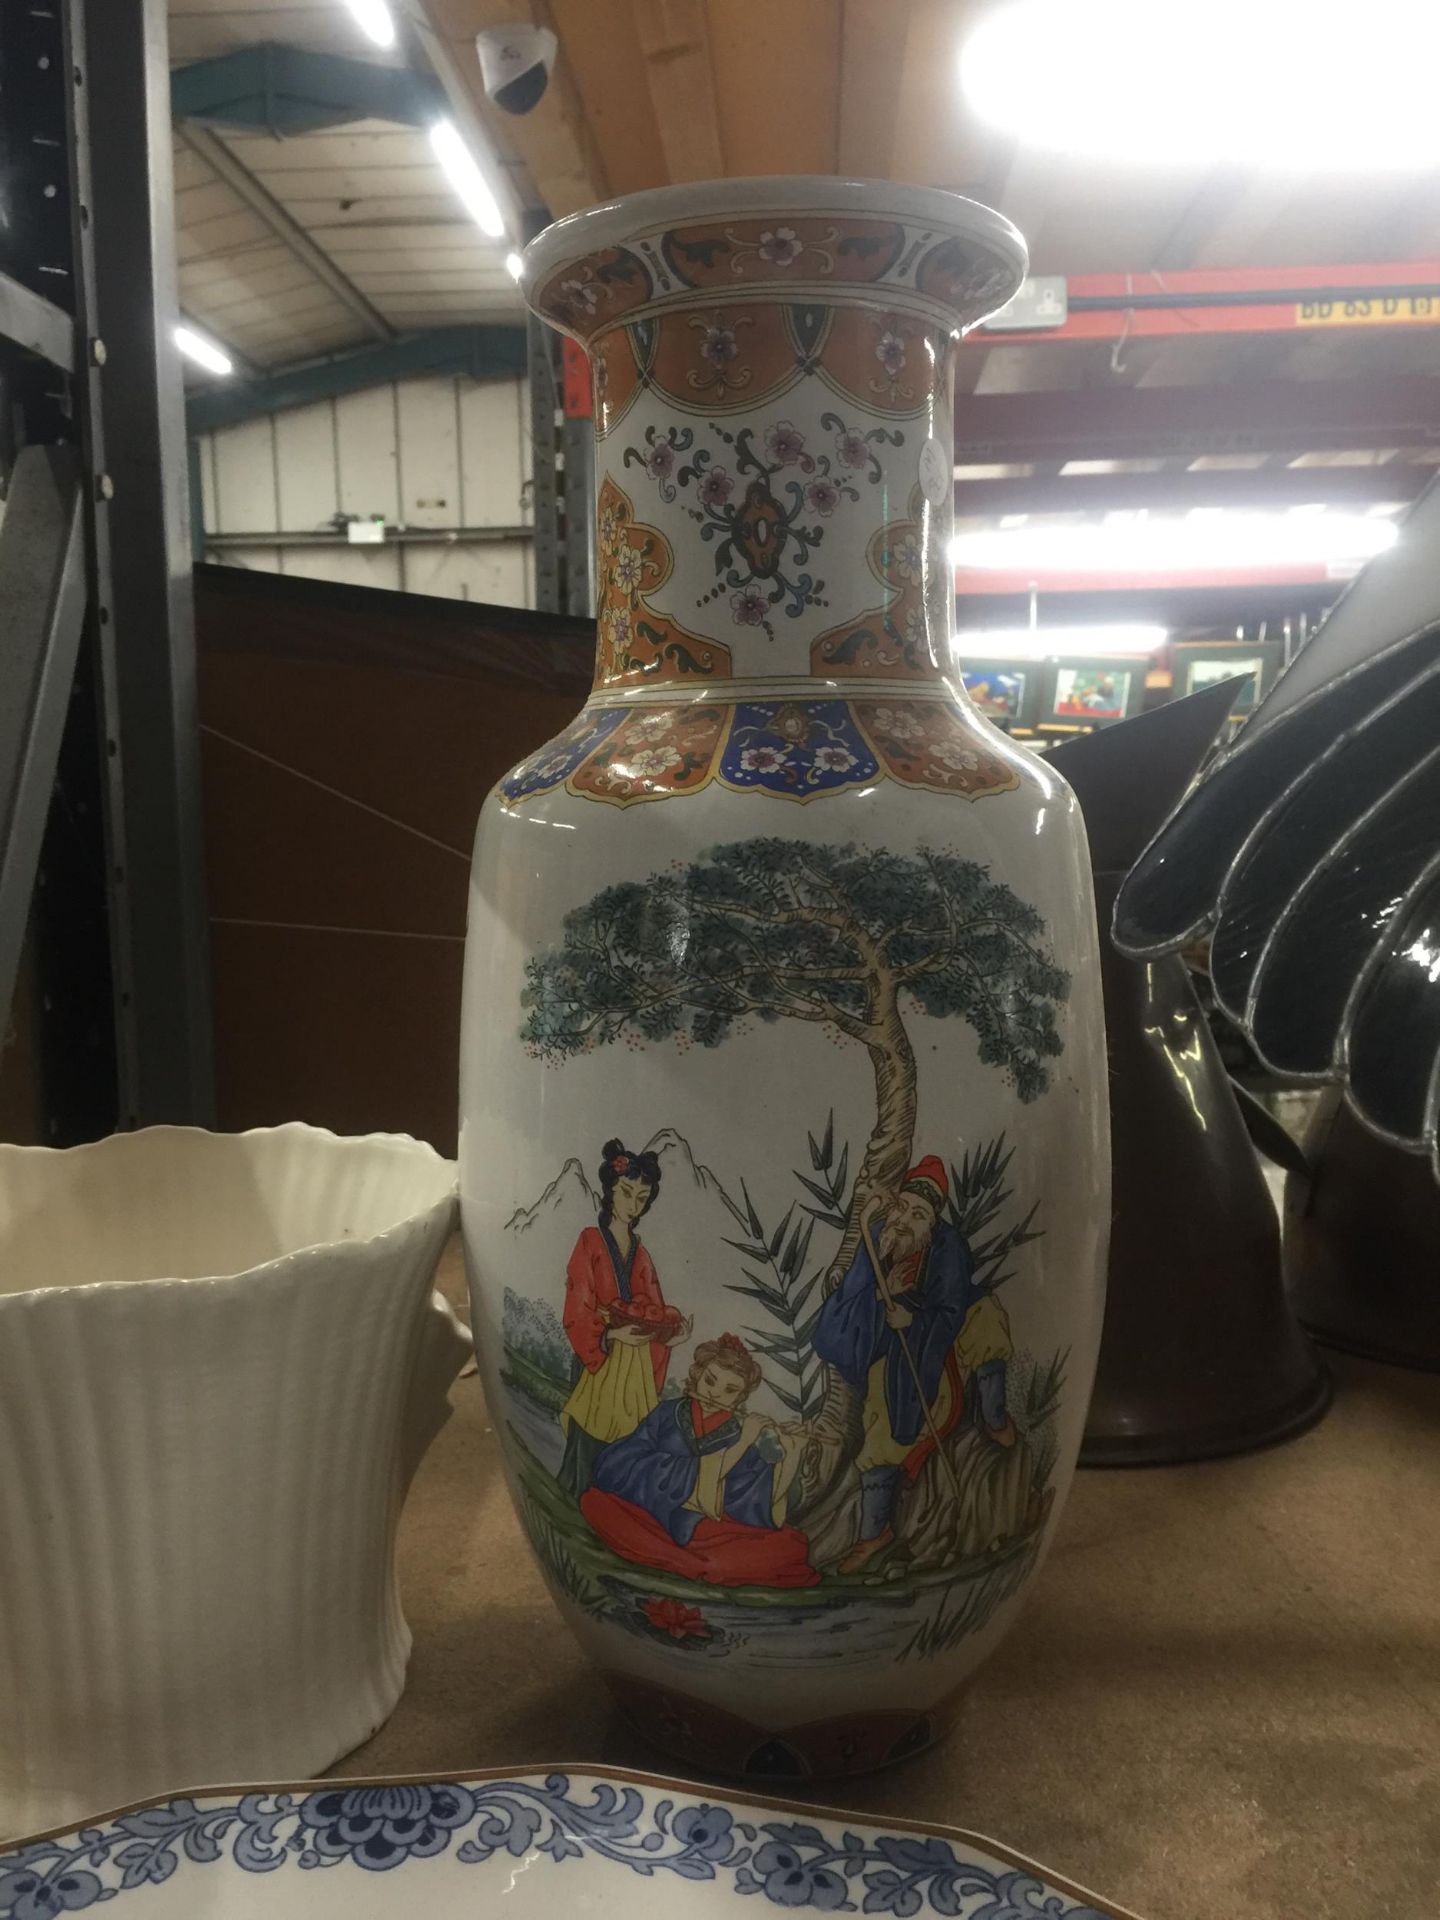 THREE LARGE CERAMIC ITEMS TO INCLUDE A LARGE ORIENTAL STYLE VASE, A MEAT PLATTER WITH BIRD DESIGN - Image 4 of 5